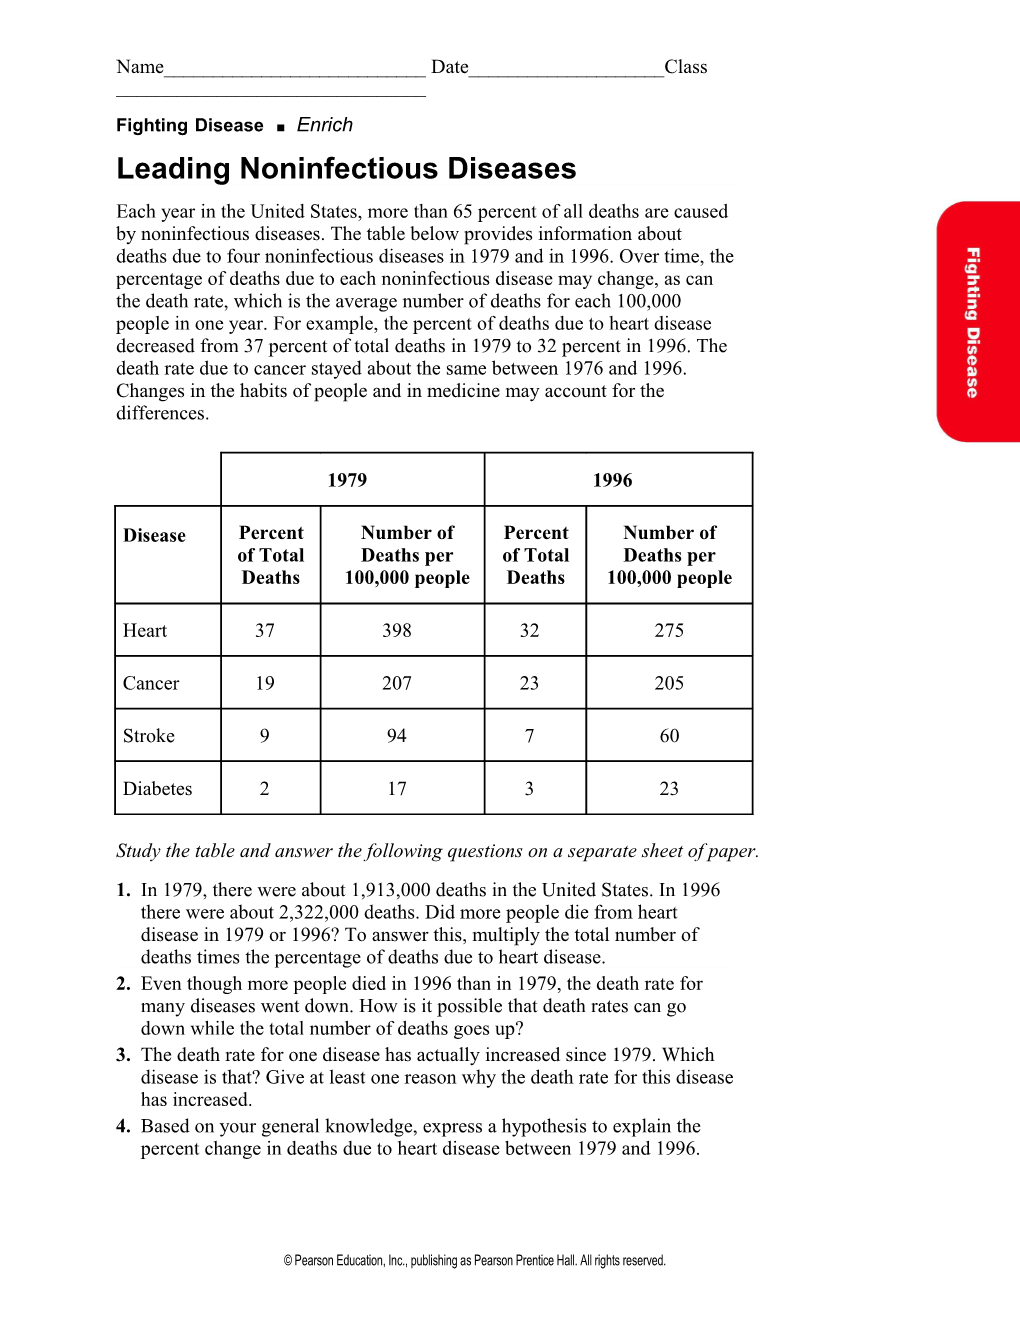 Leading Noninfectious Diseases